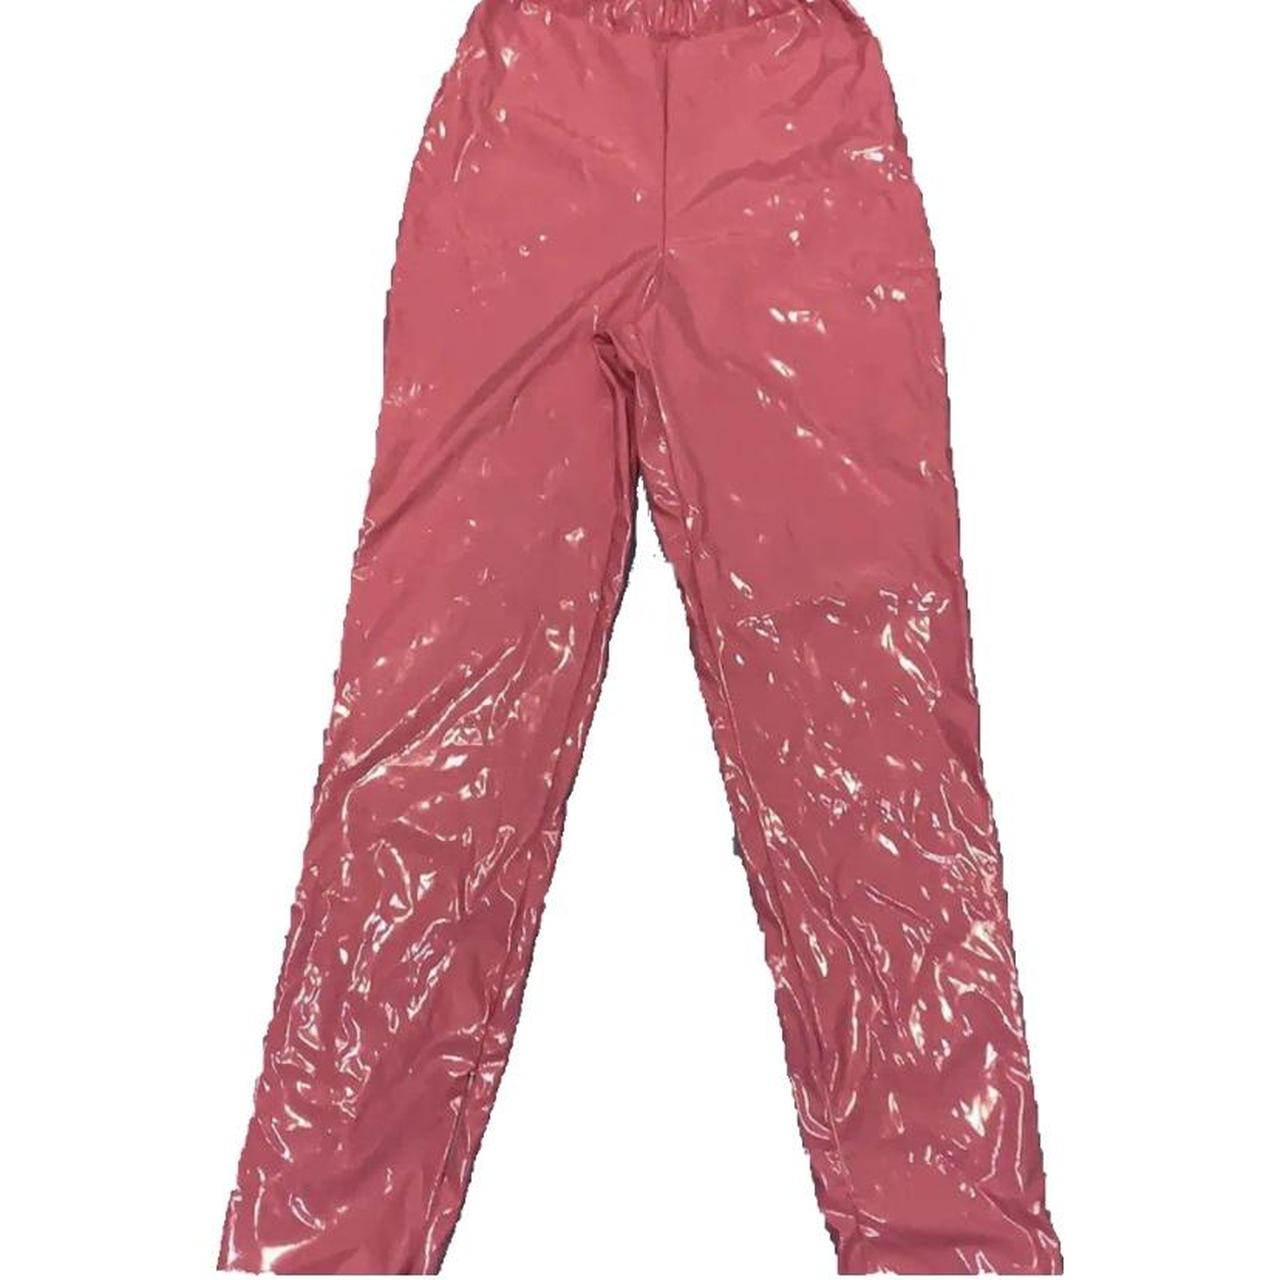 Hot pink trousers  PrettyLittleThing